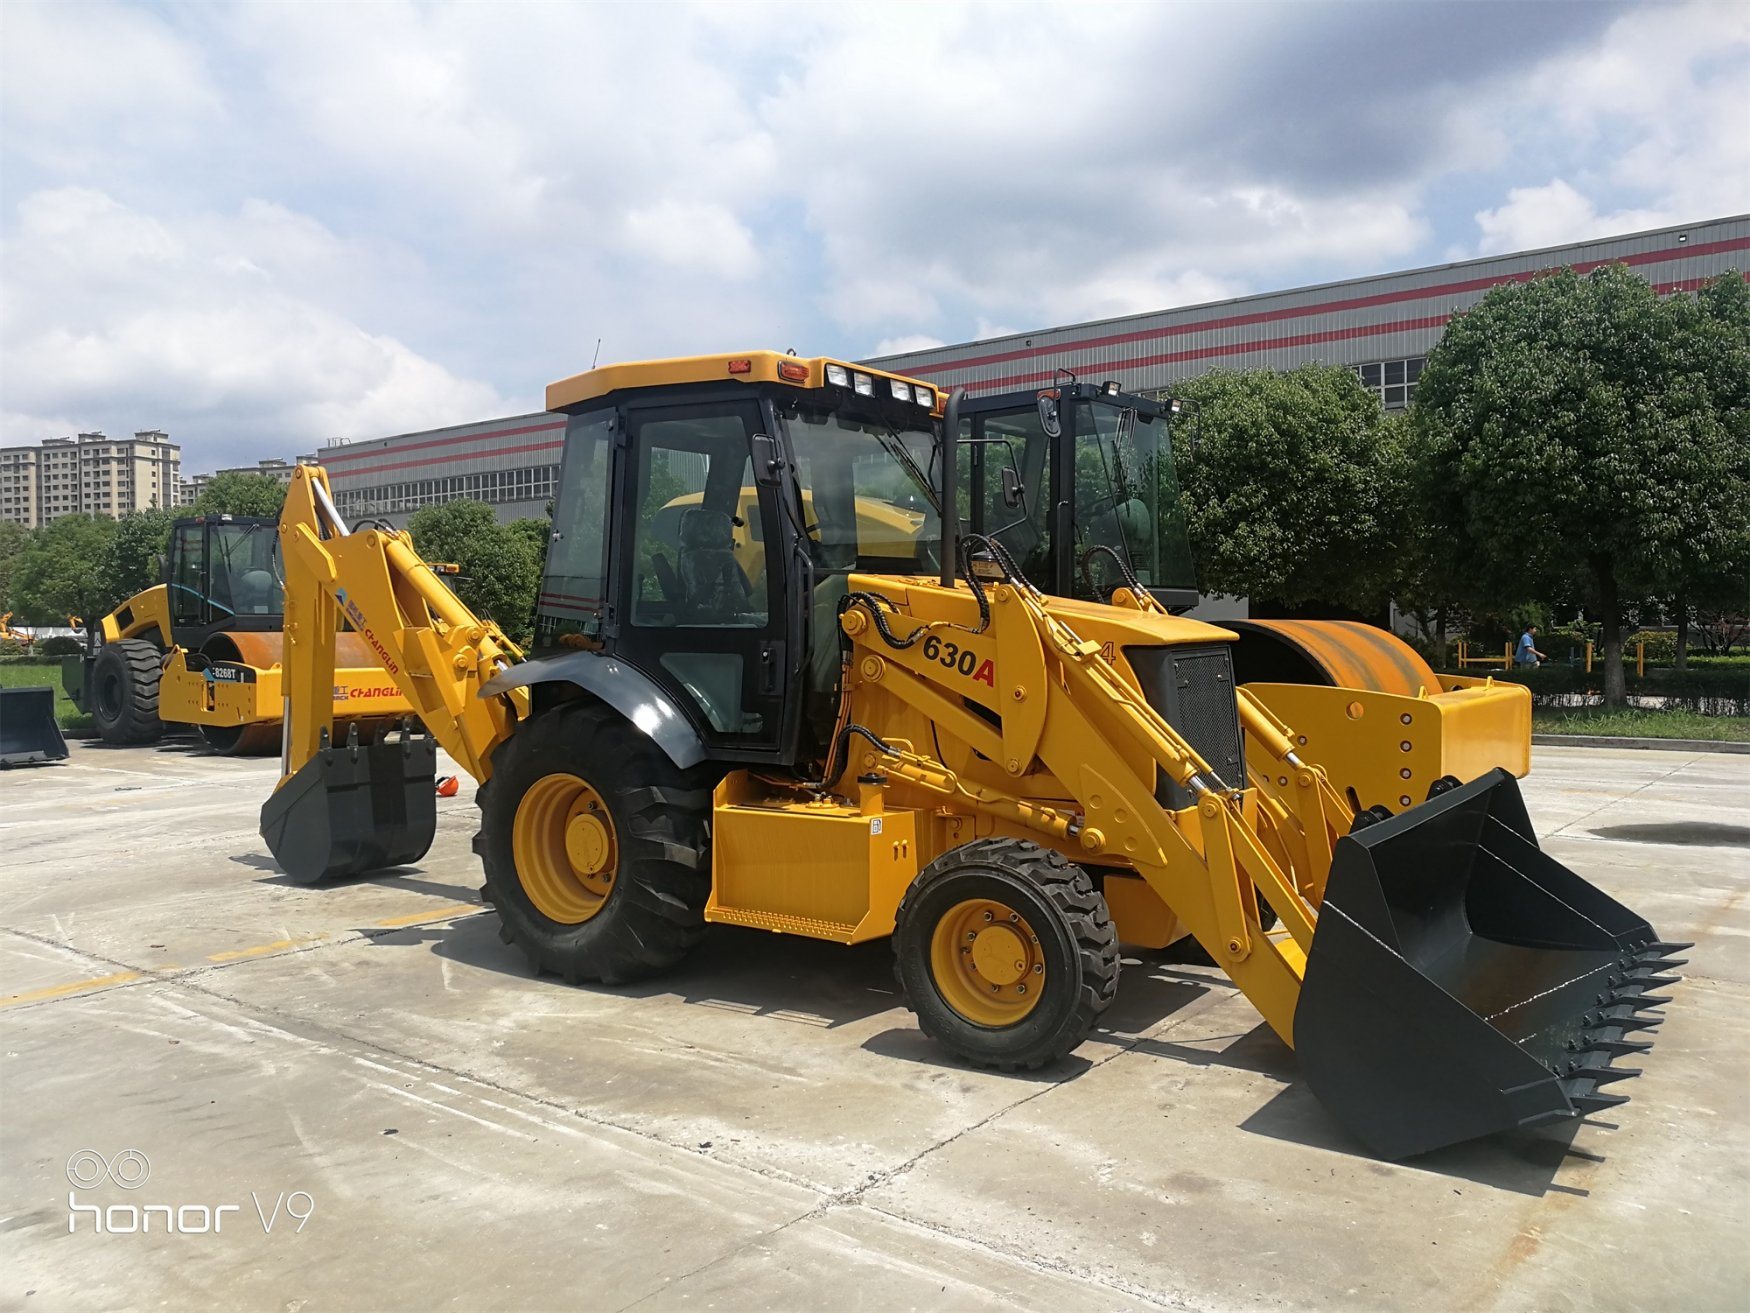 
                China Changlin Equipment Small Farm Tractor Backhoe Loader バックホー 630A
            